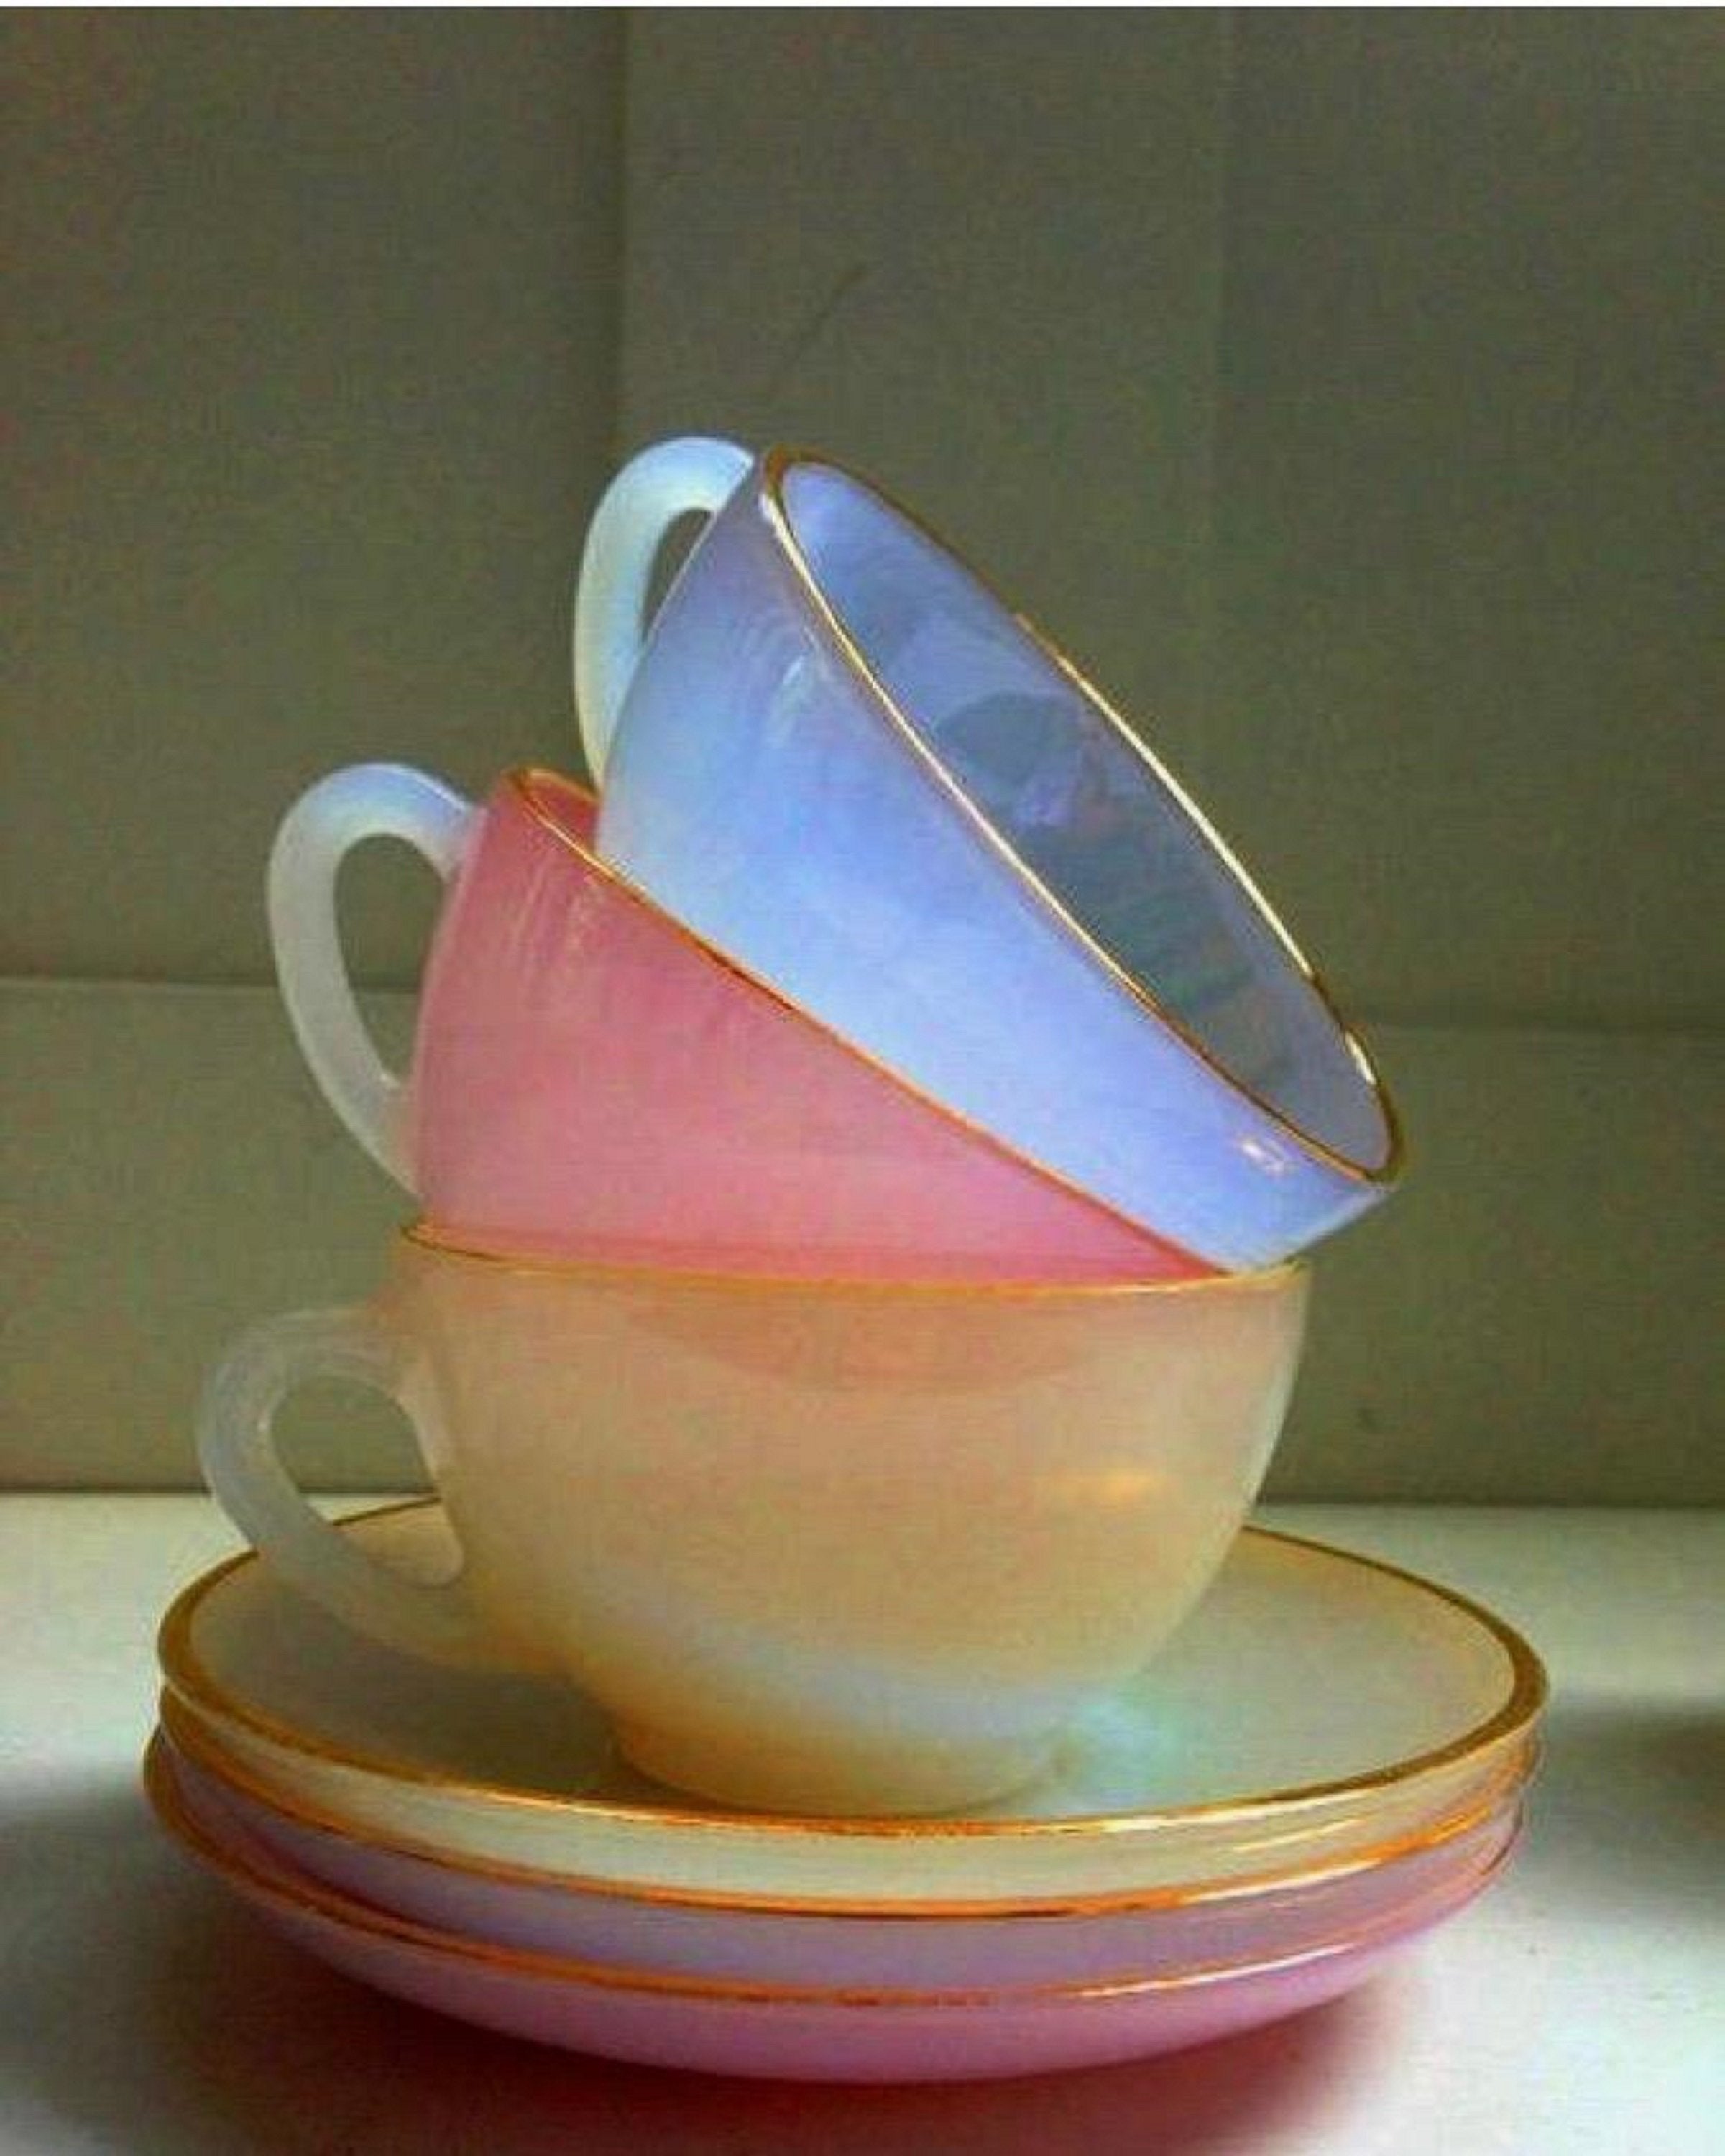 Buy Cups And Saucers Online